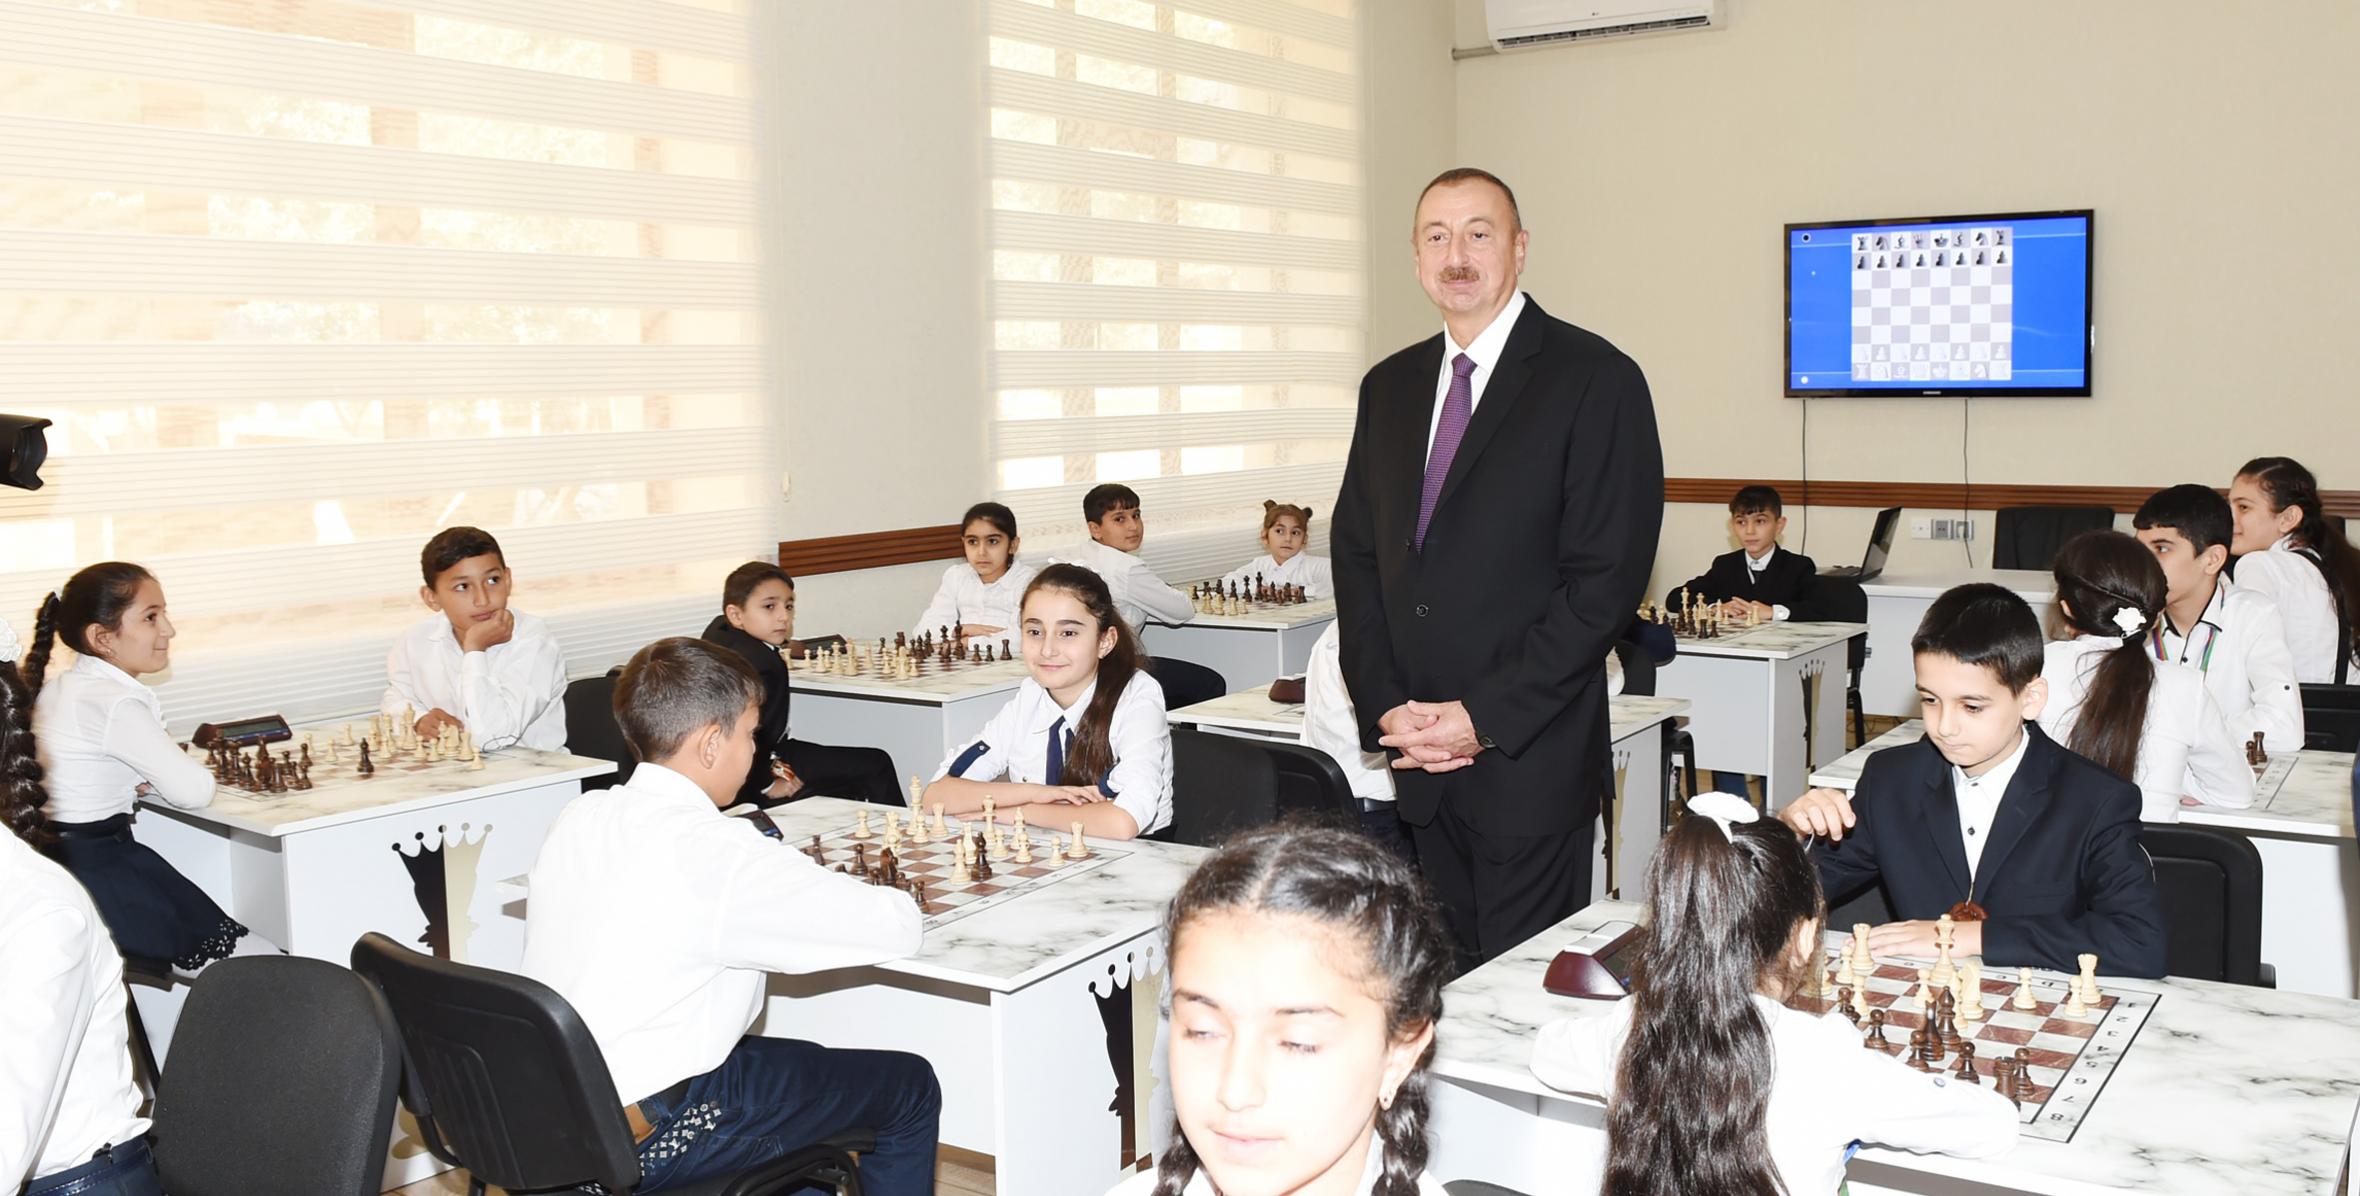 Ilham Aliyev attended the opening of a chess school in Goychay